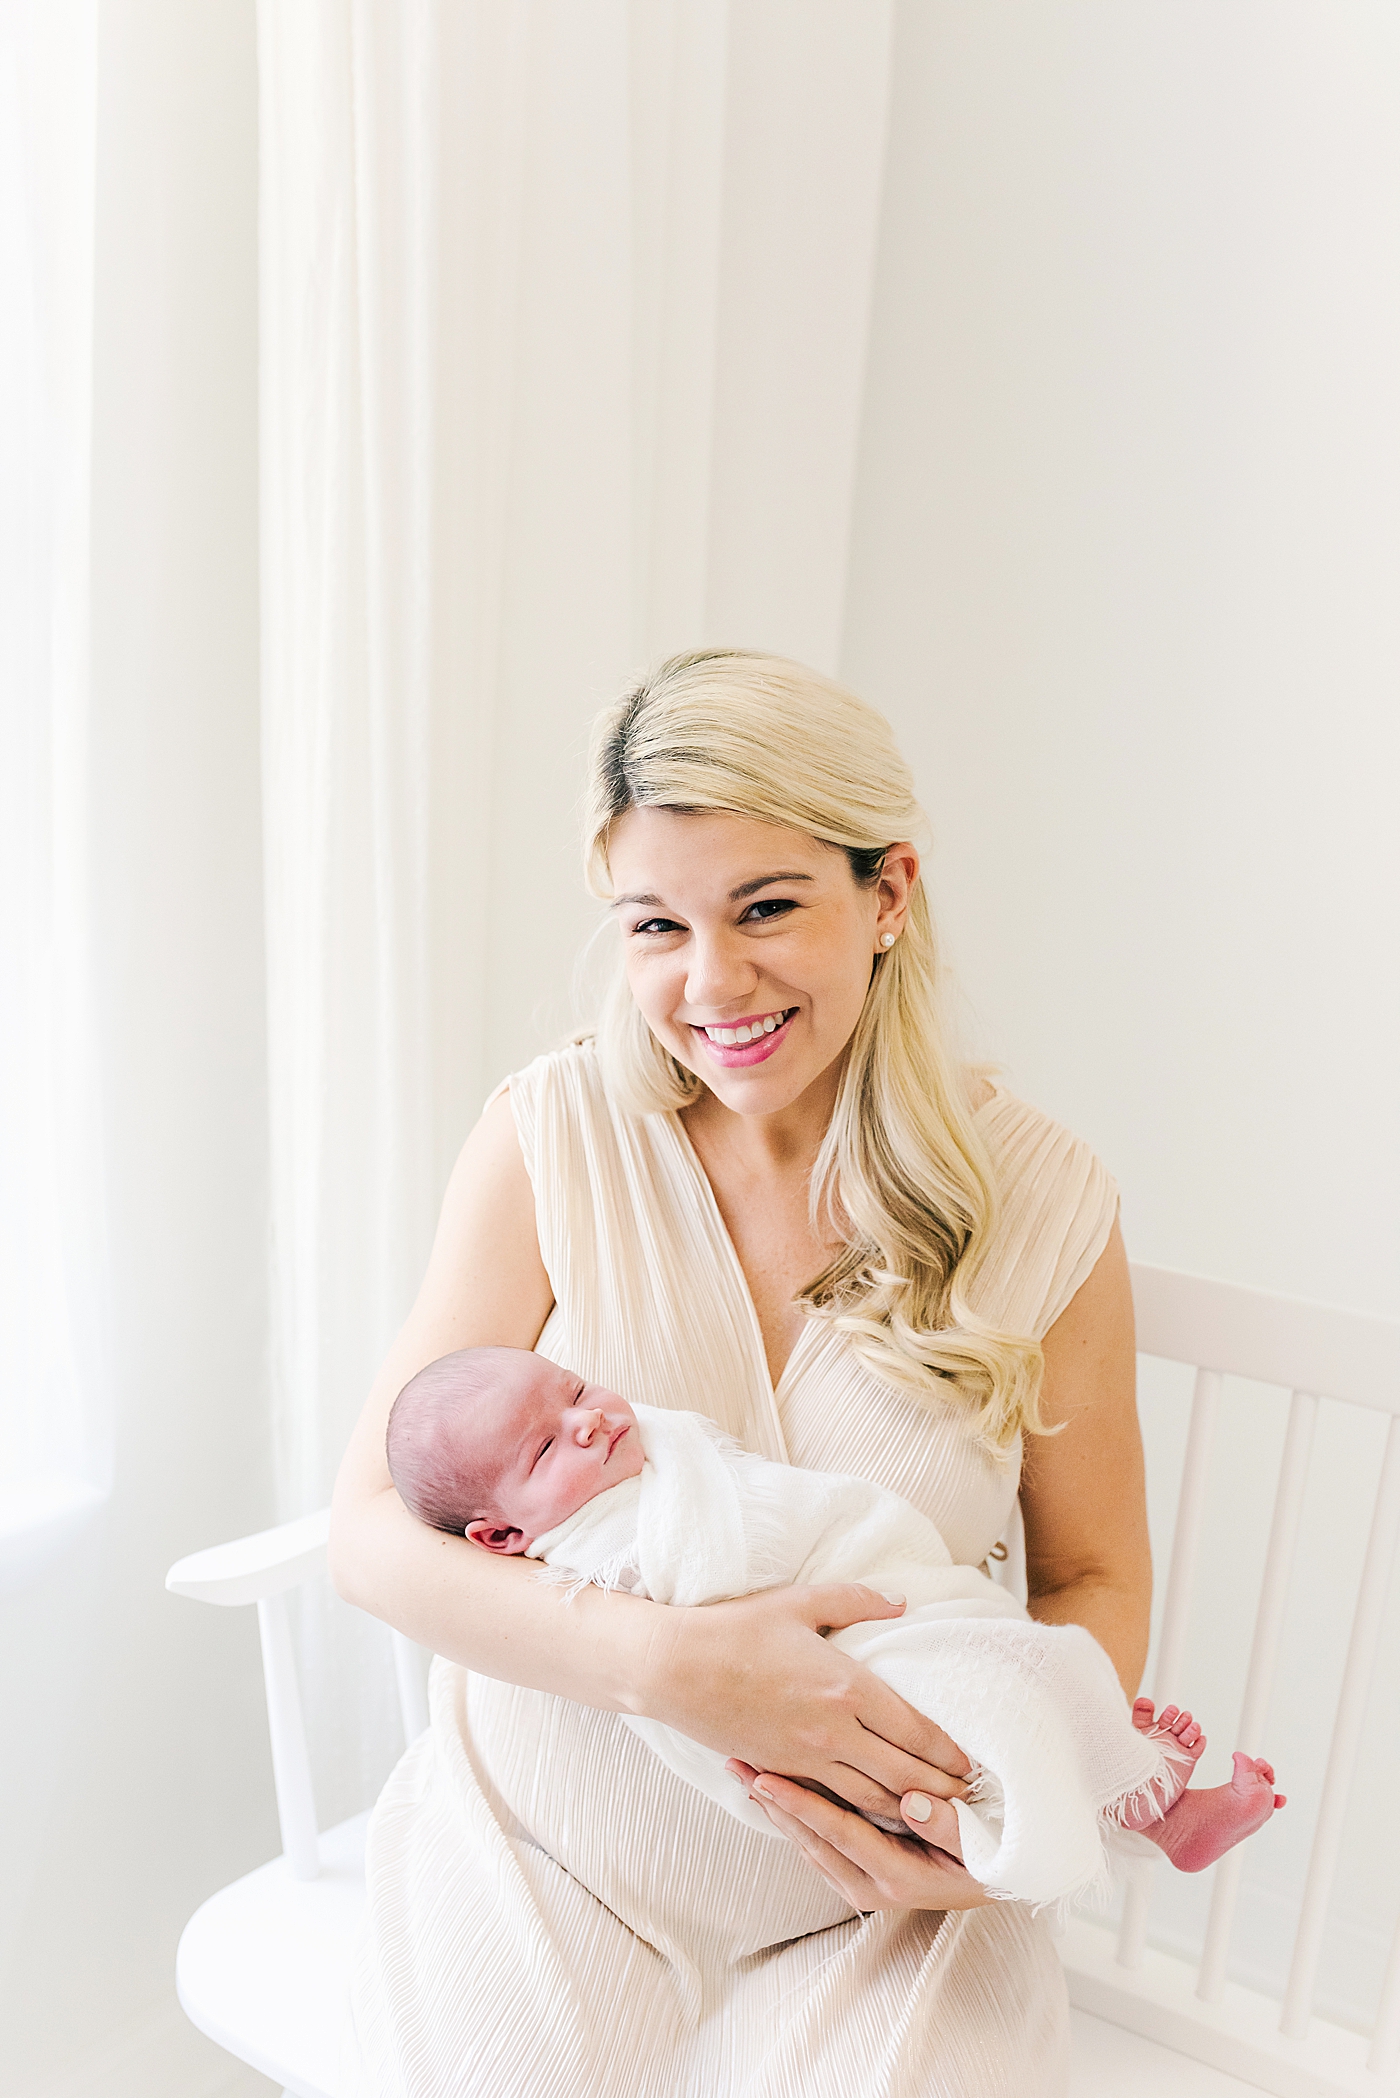 Mom in gold dress snuggling her new baby | Photo by Anna Wisjo Photography